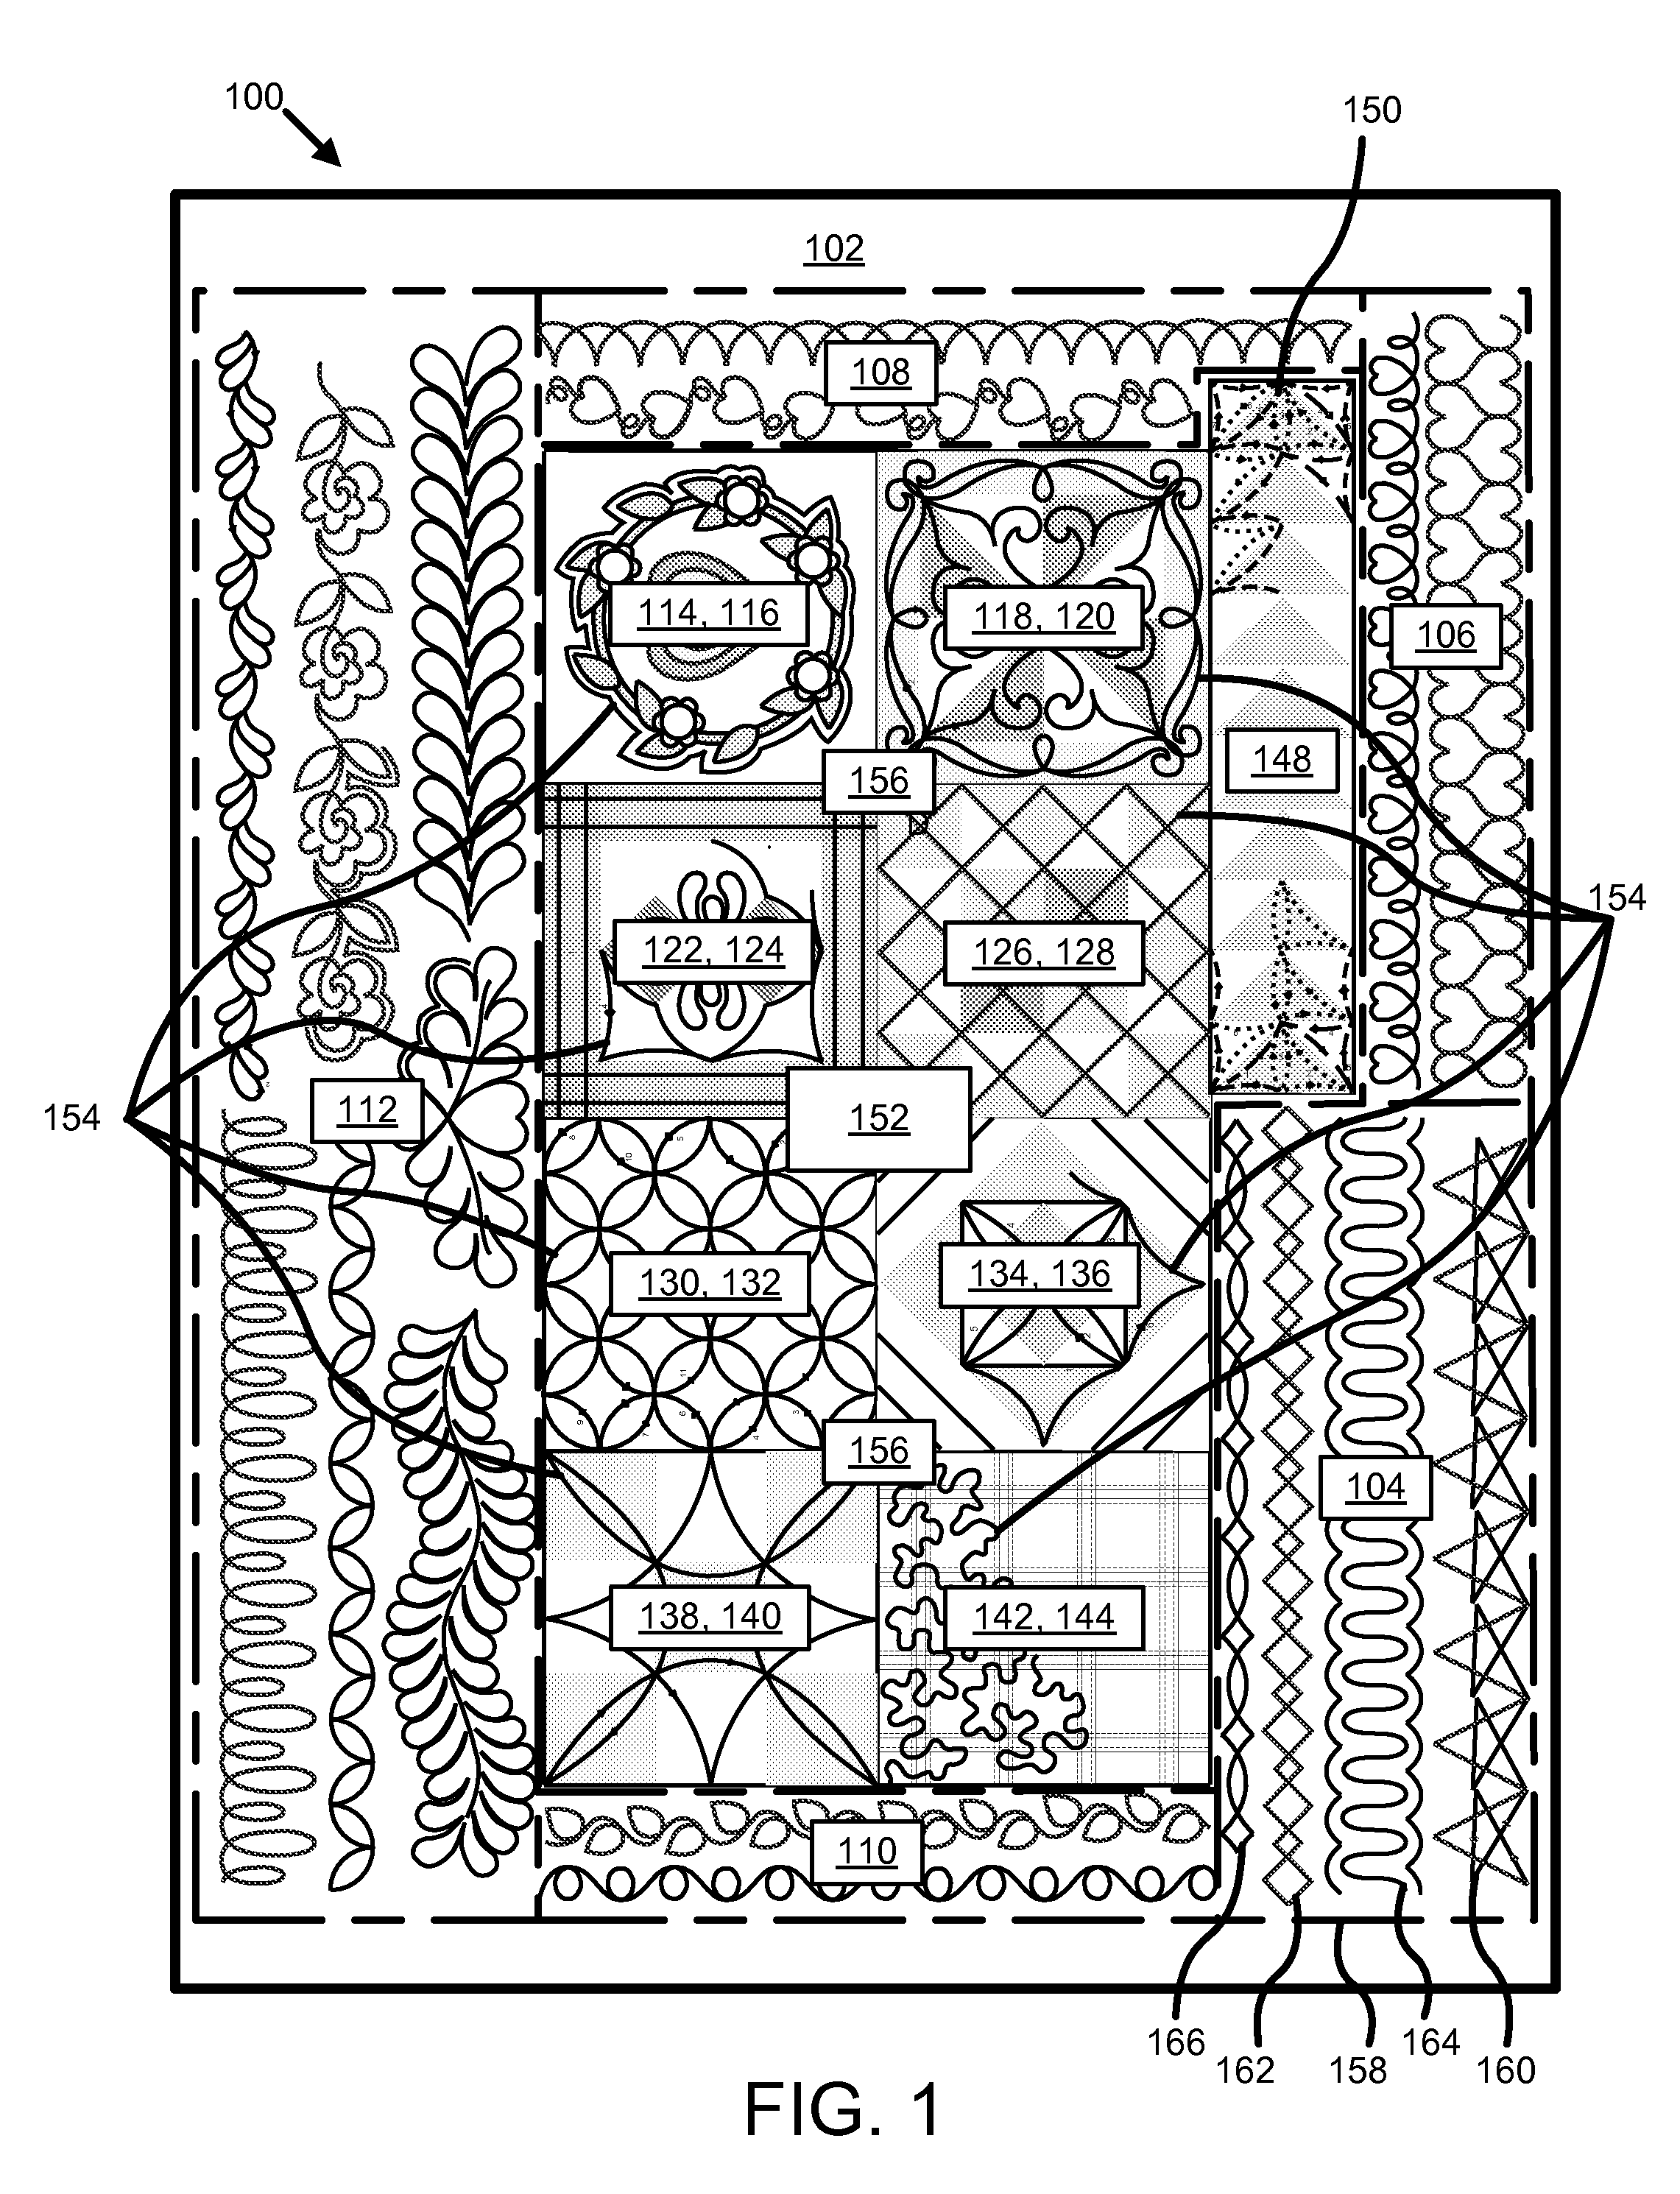 Apparatus, system, and method for facilitating the instruction of quilting techniques